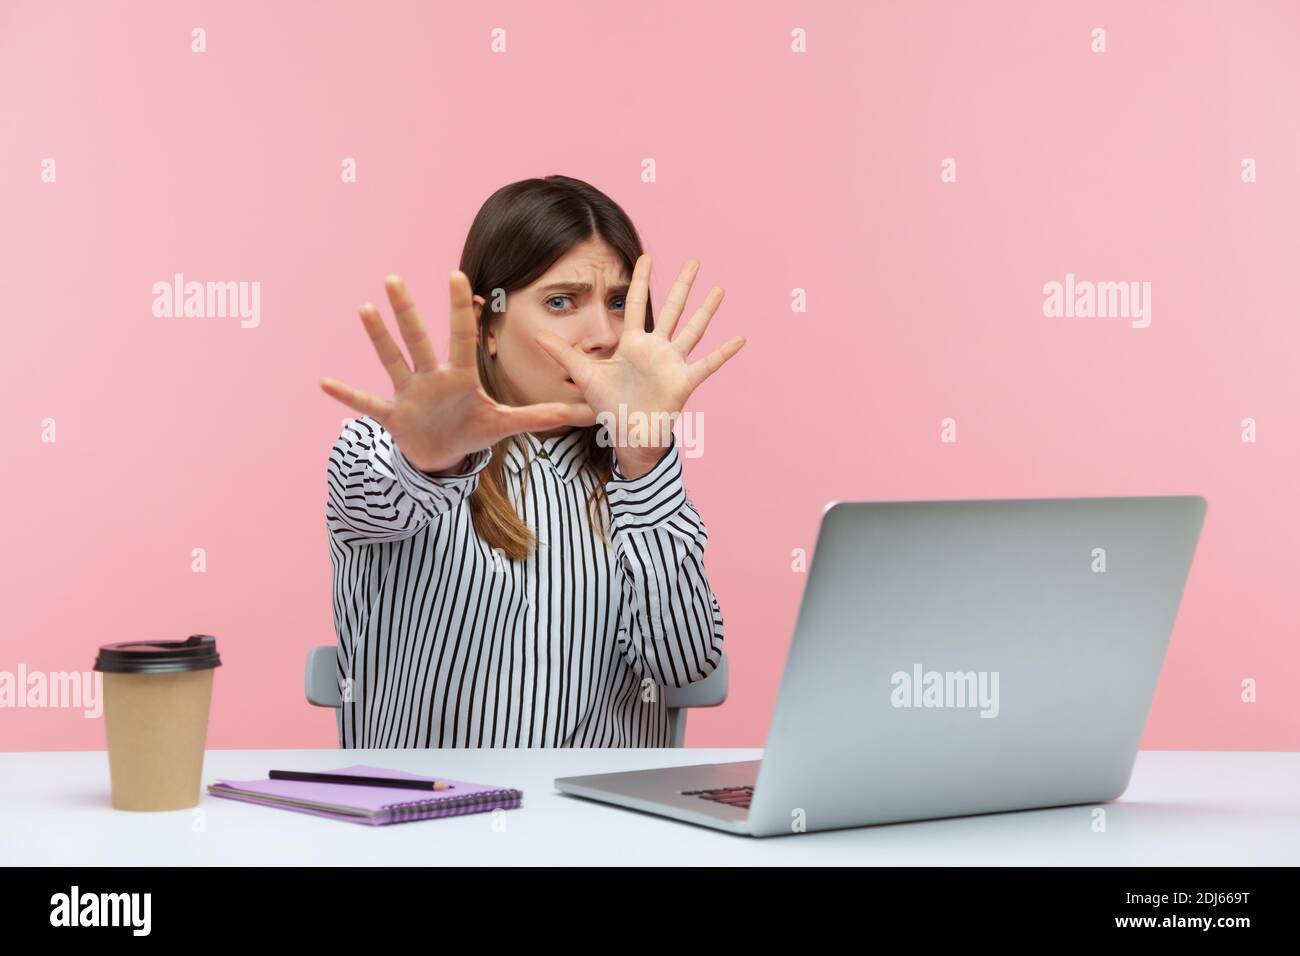 No, I'm scared! Frightened woman with shocked expression raising hands in stop gesture, defending herself, freaked out of troubles working on laptop. Stock Photo